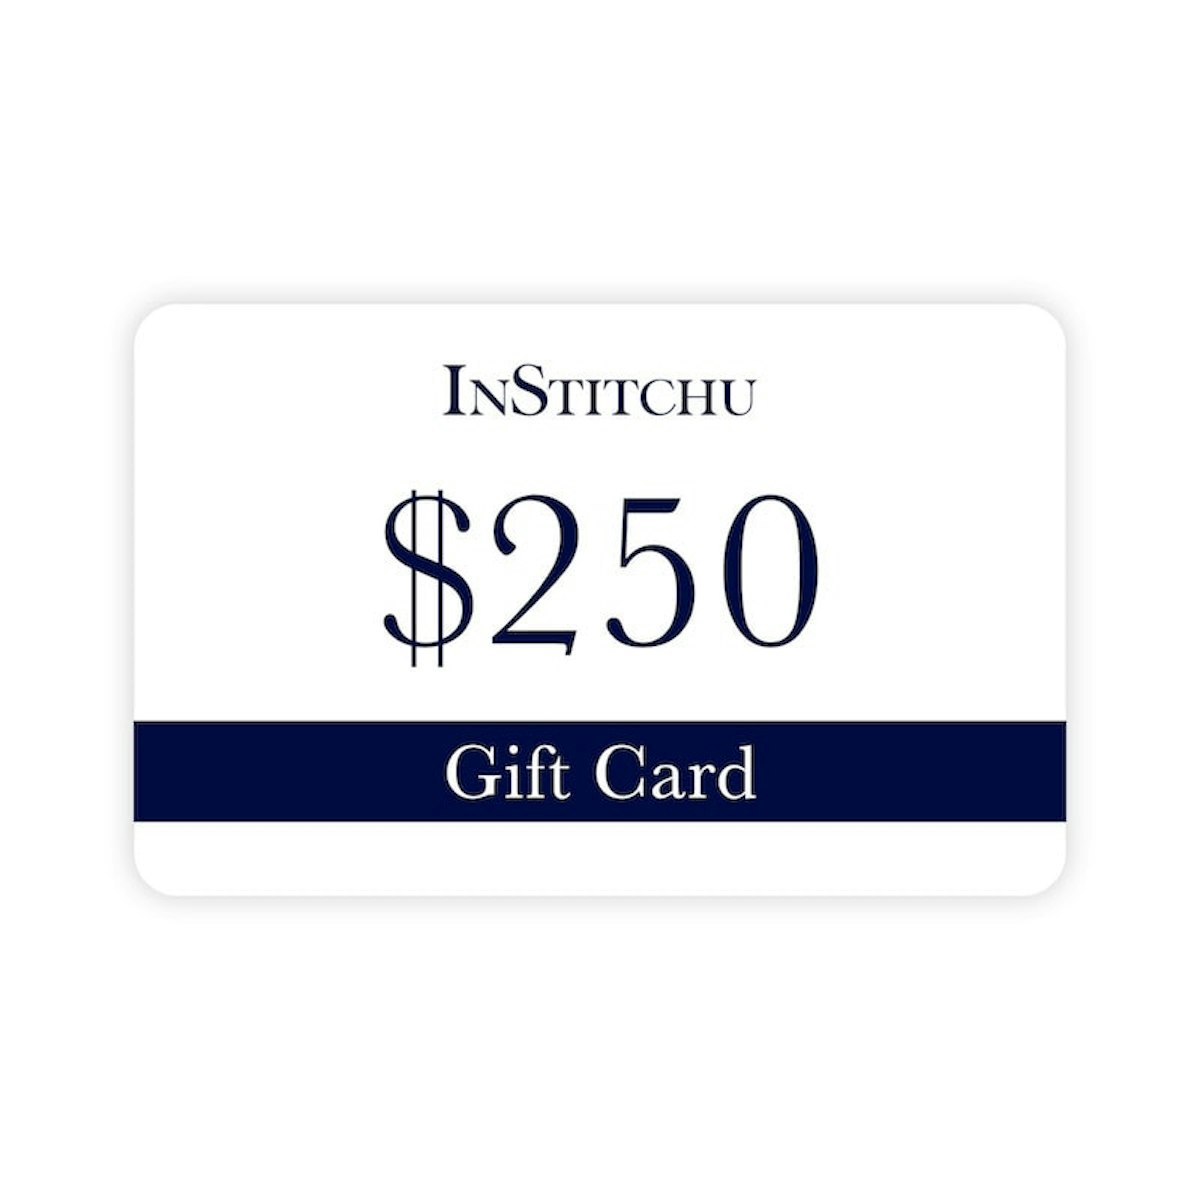 InStitchu Physical Gift Card $250